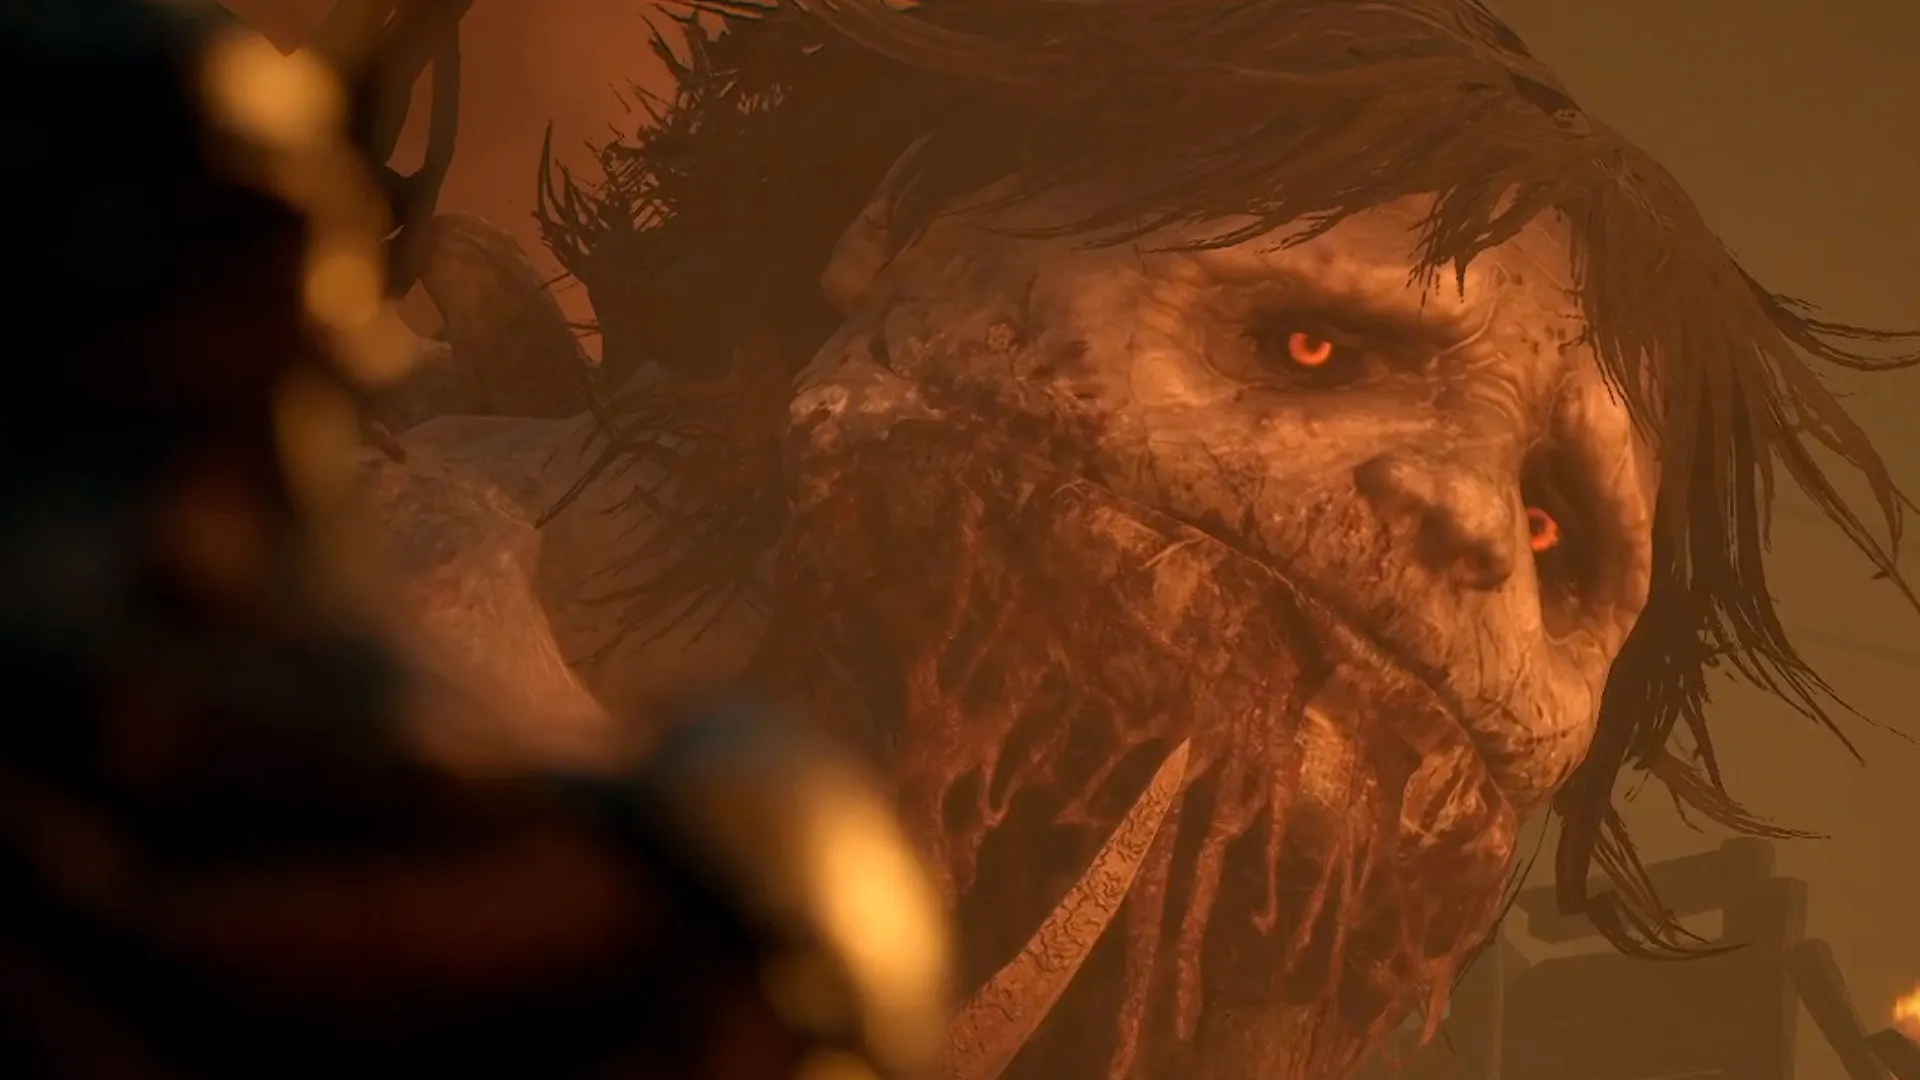 The Lords of the Fallen gameplay features a terrifying spirit world